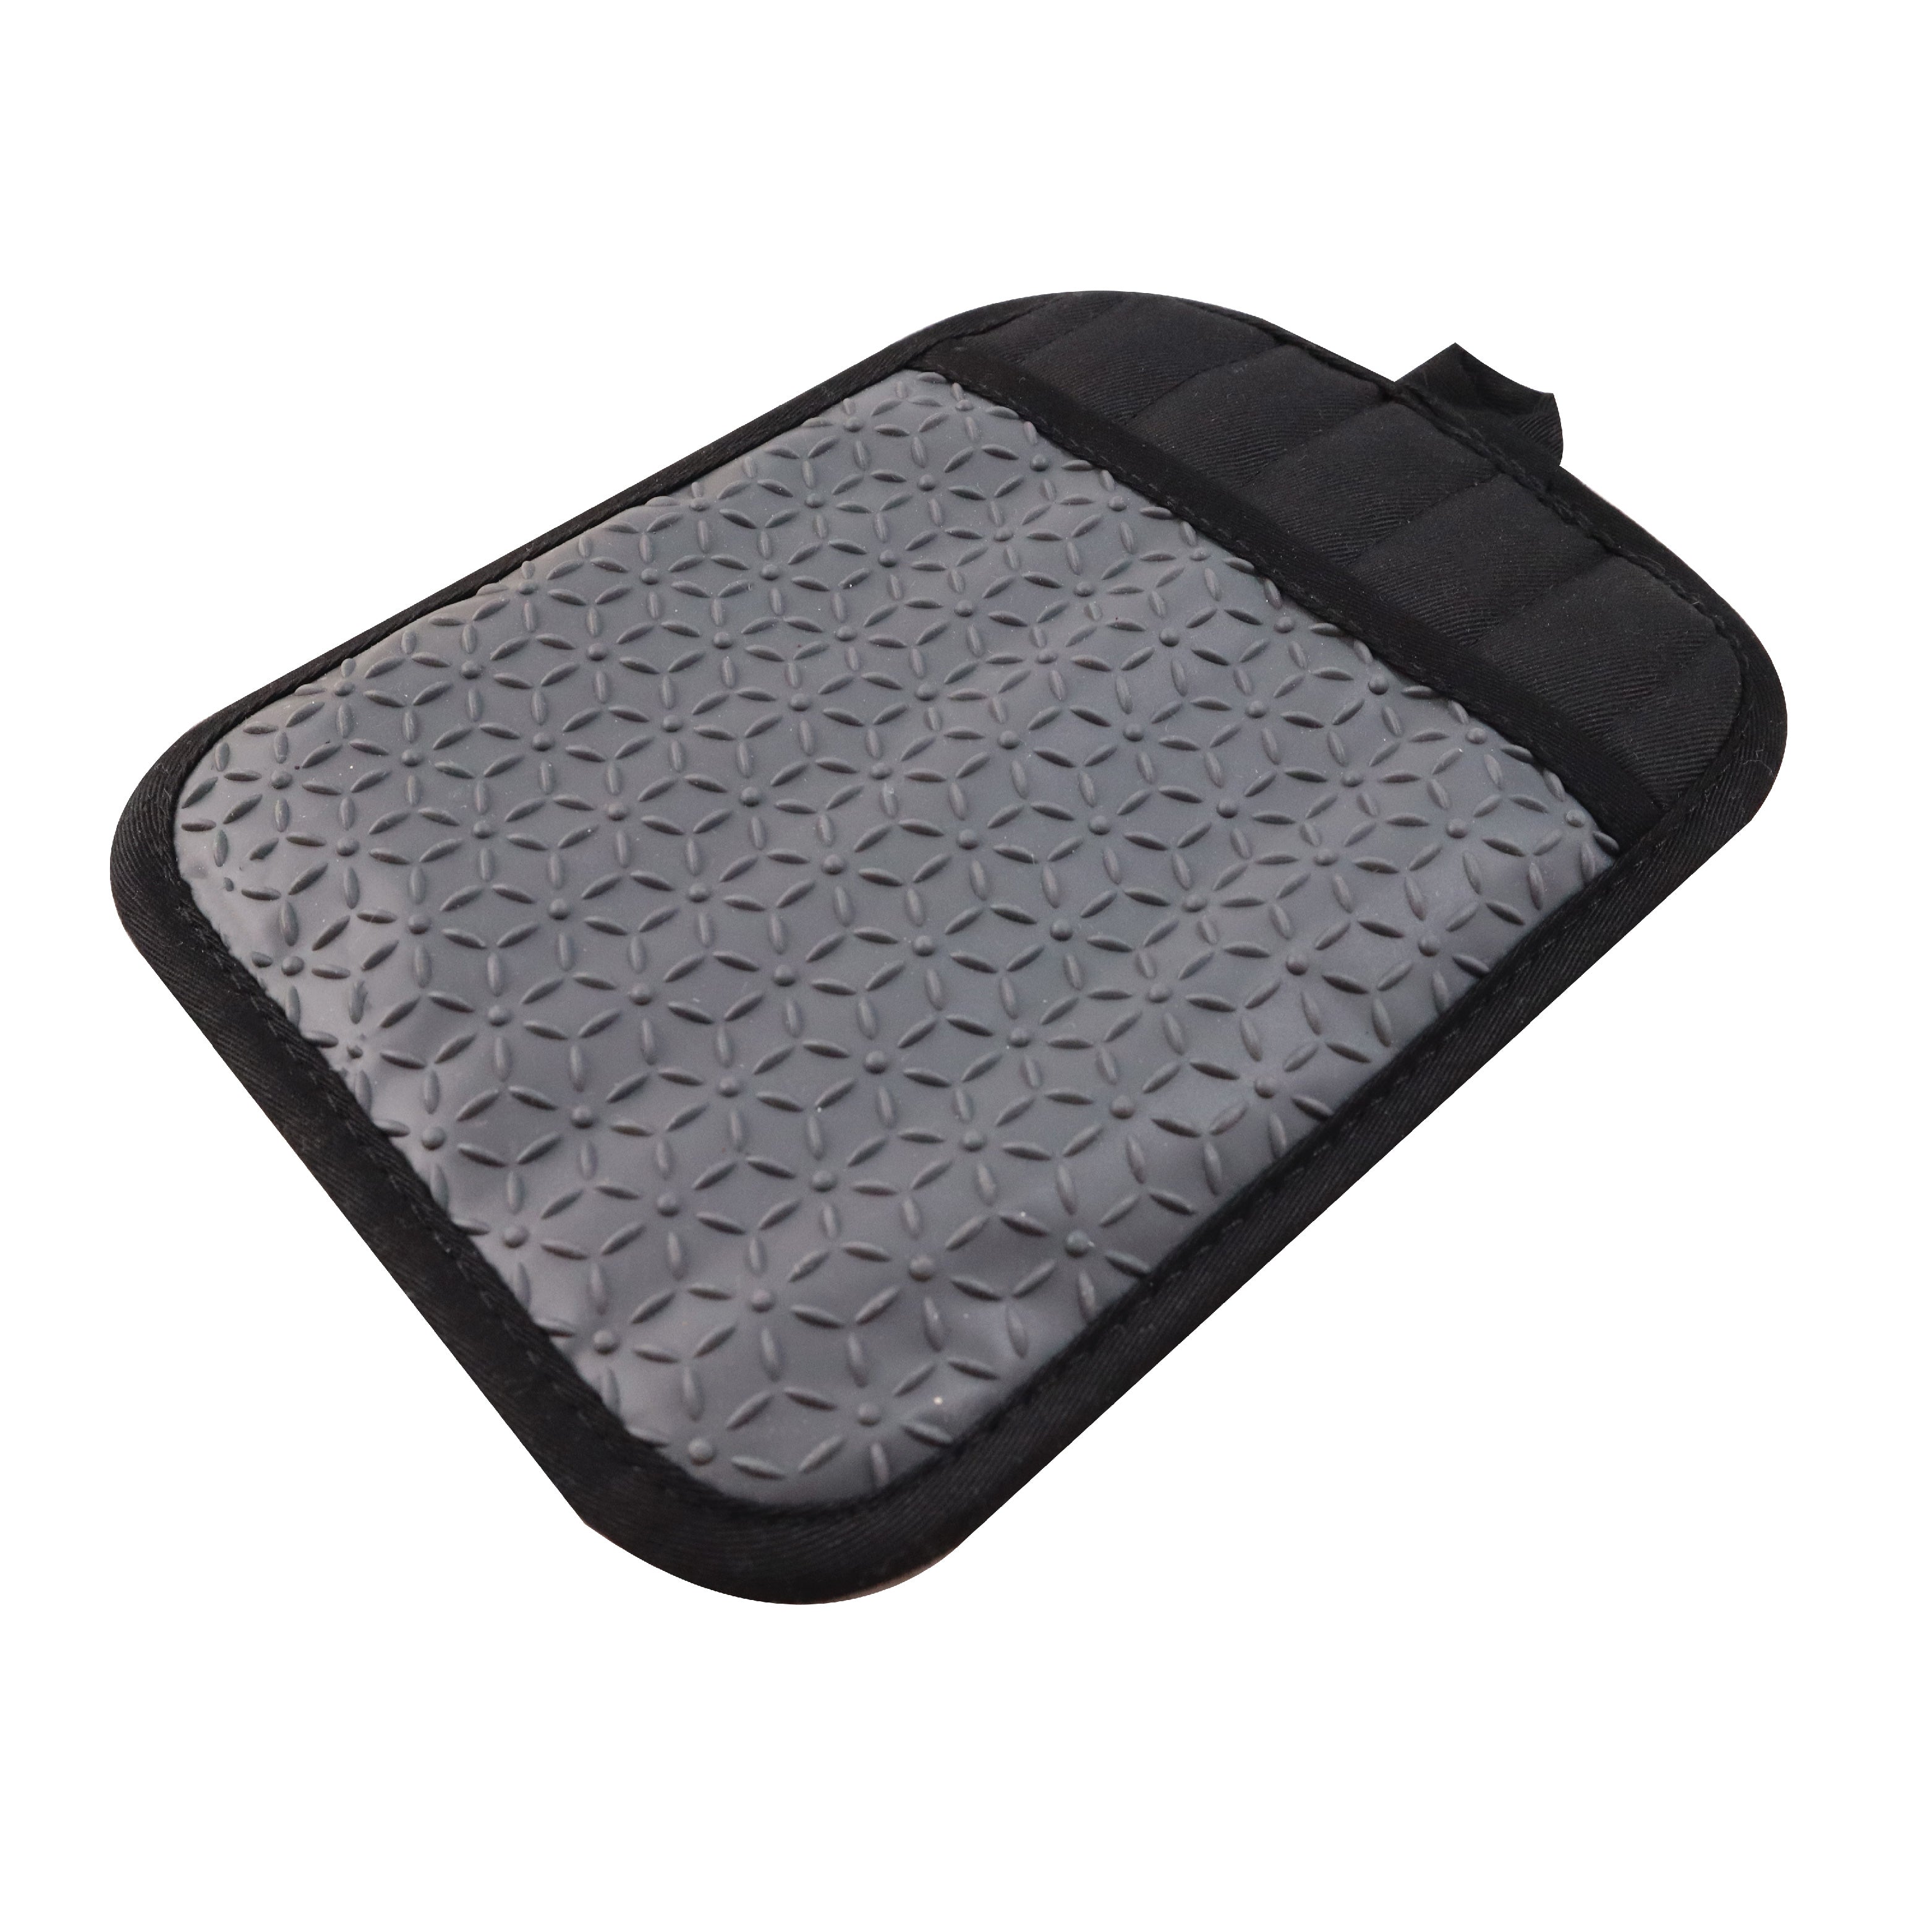 Silicone Pot Holder Magnetic, Silicone Magnetic Oven Mitt